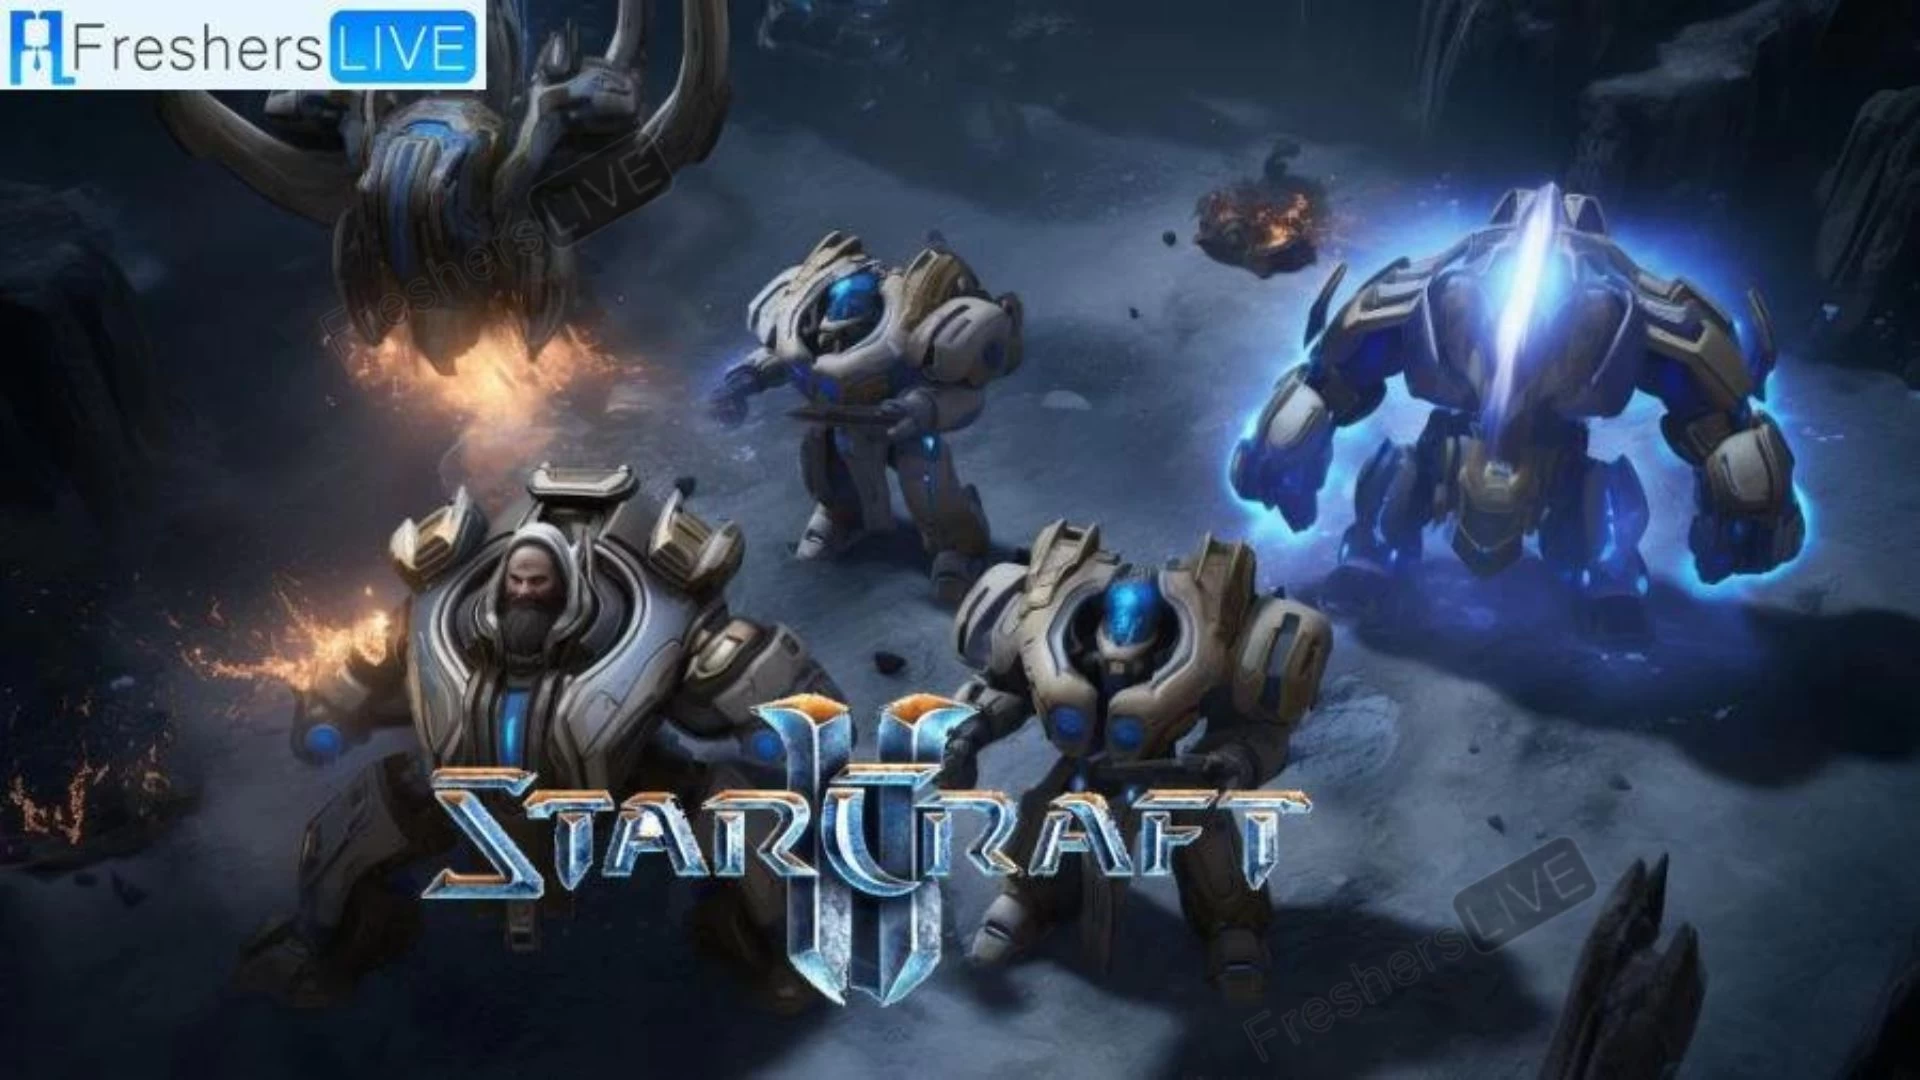 Starcraft 2 Update 5.0.12 Patch Notes: Fixes and Improvements